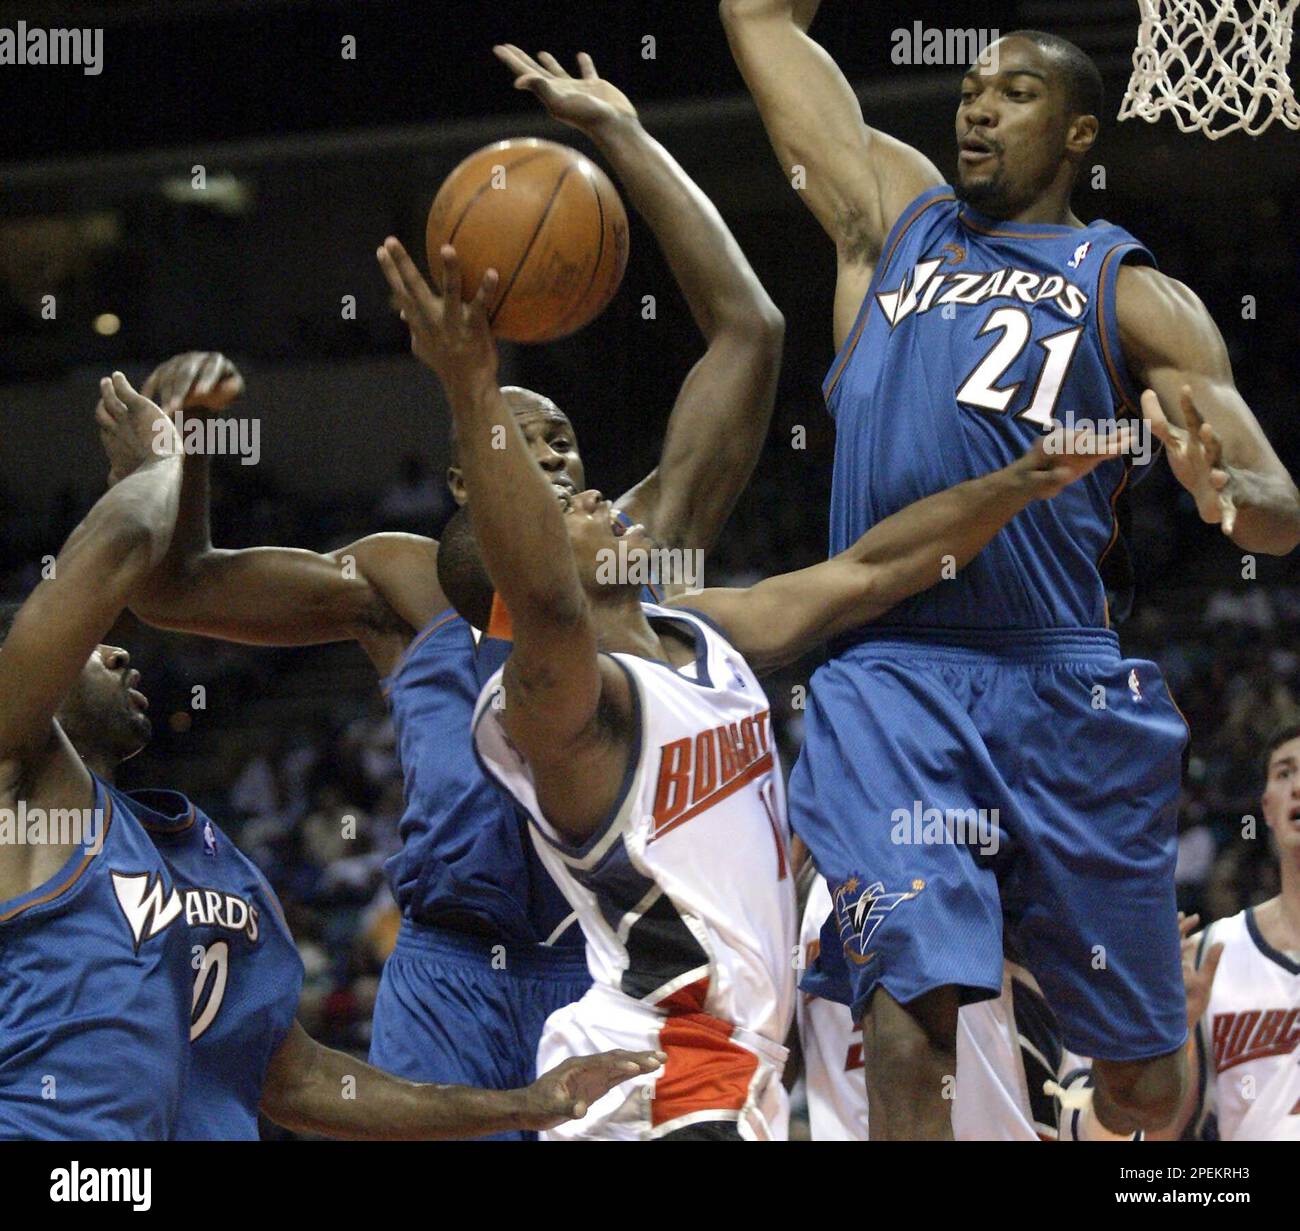 Gilbert Arenas (0) of the Washington Wizards drives to the basket